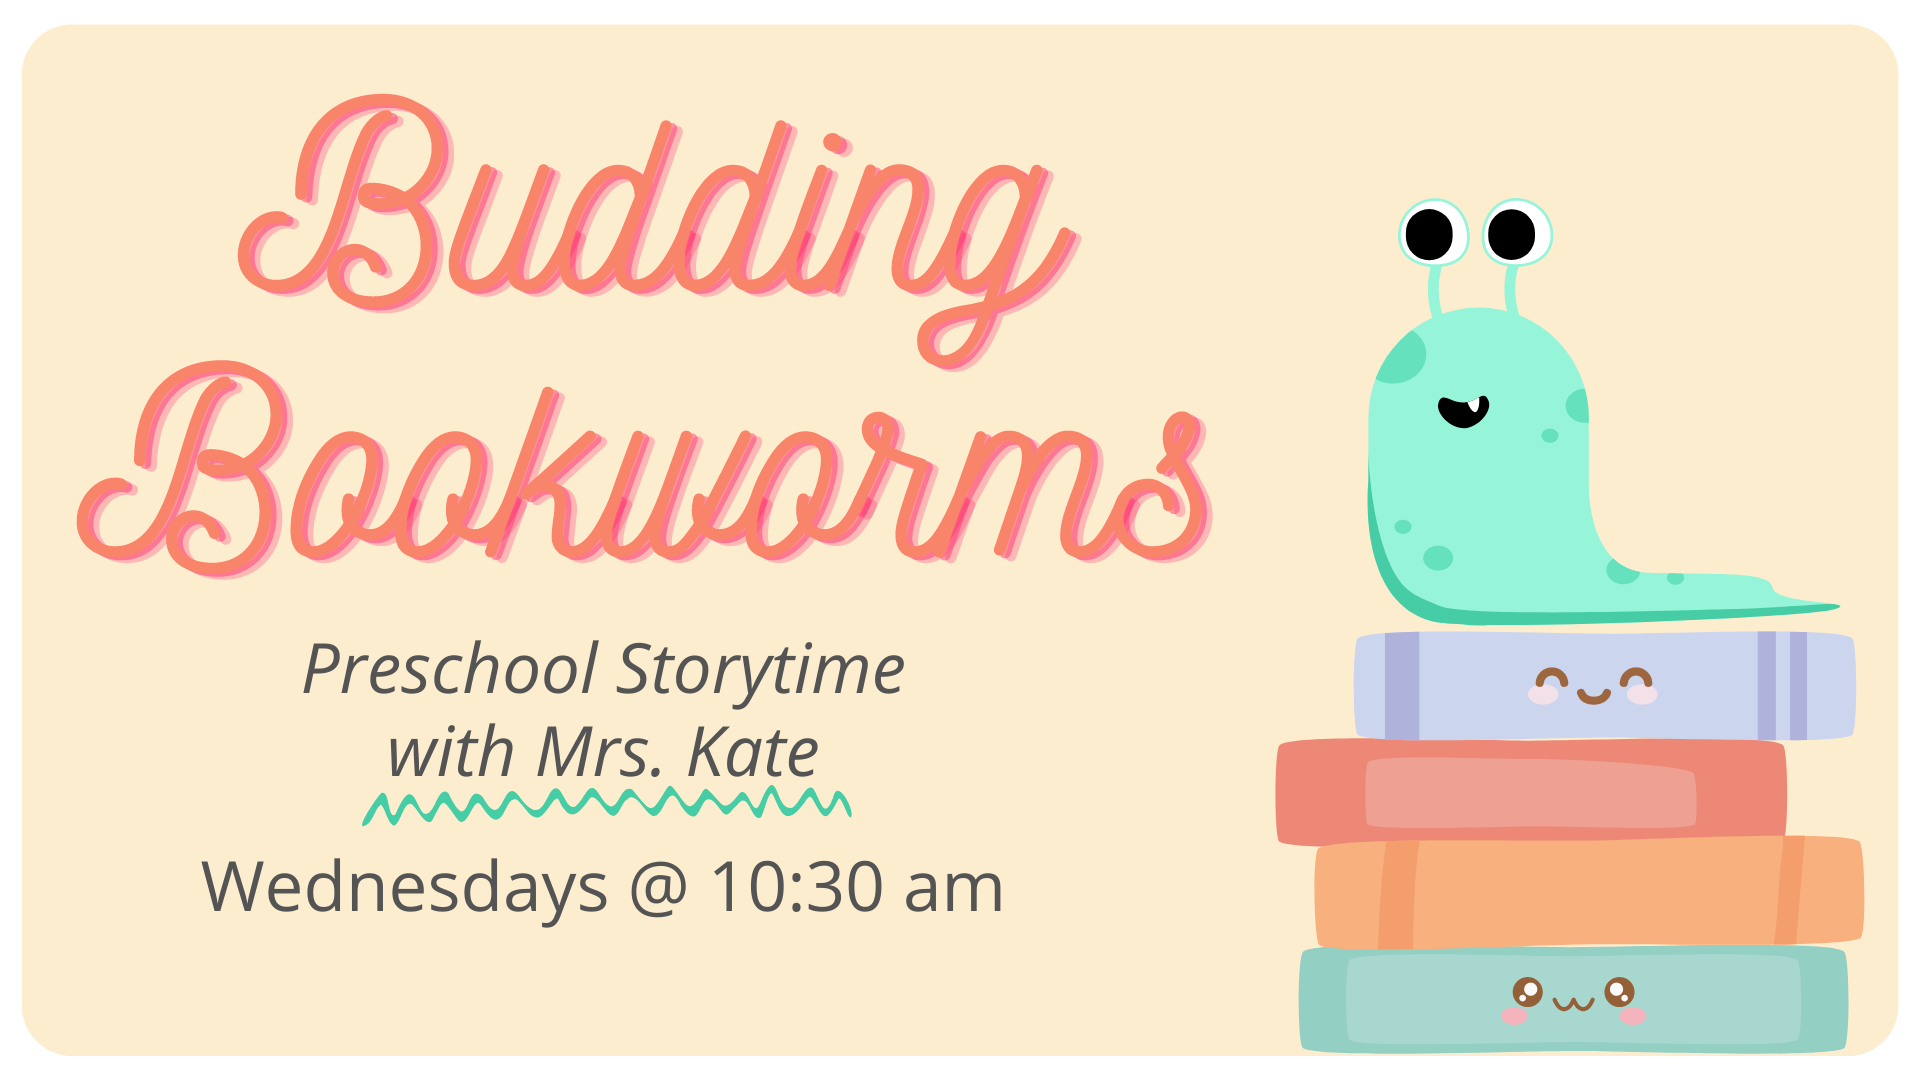 Budding Bookworms Storytime Graphic